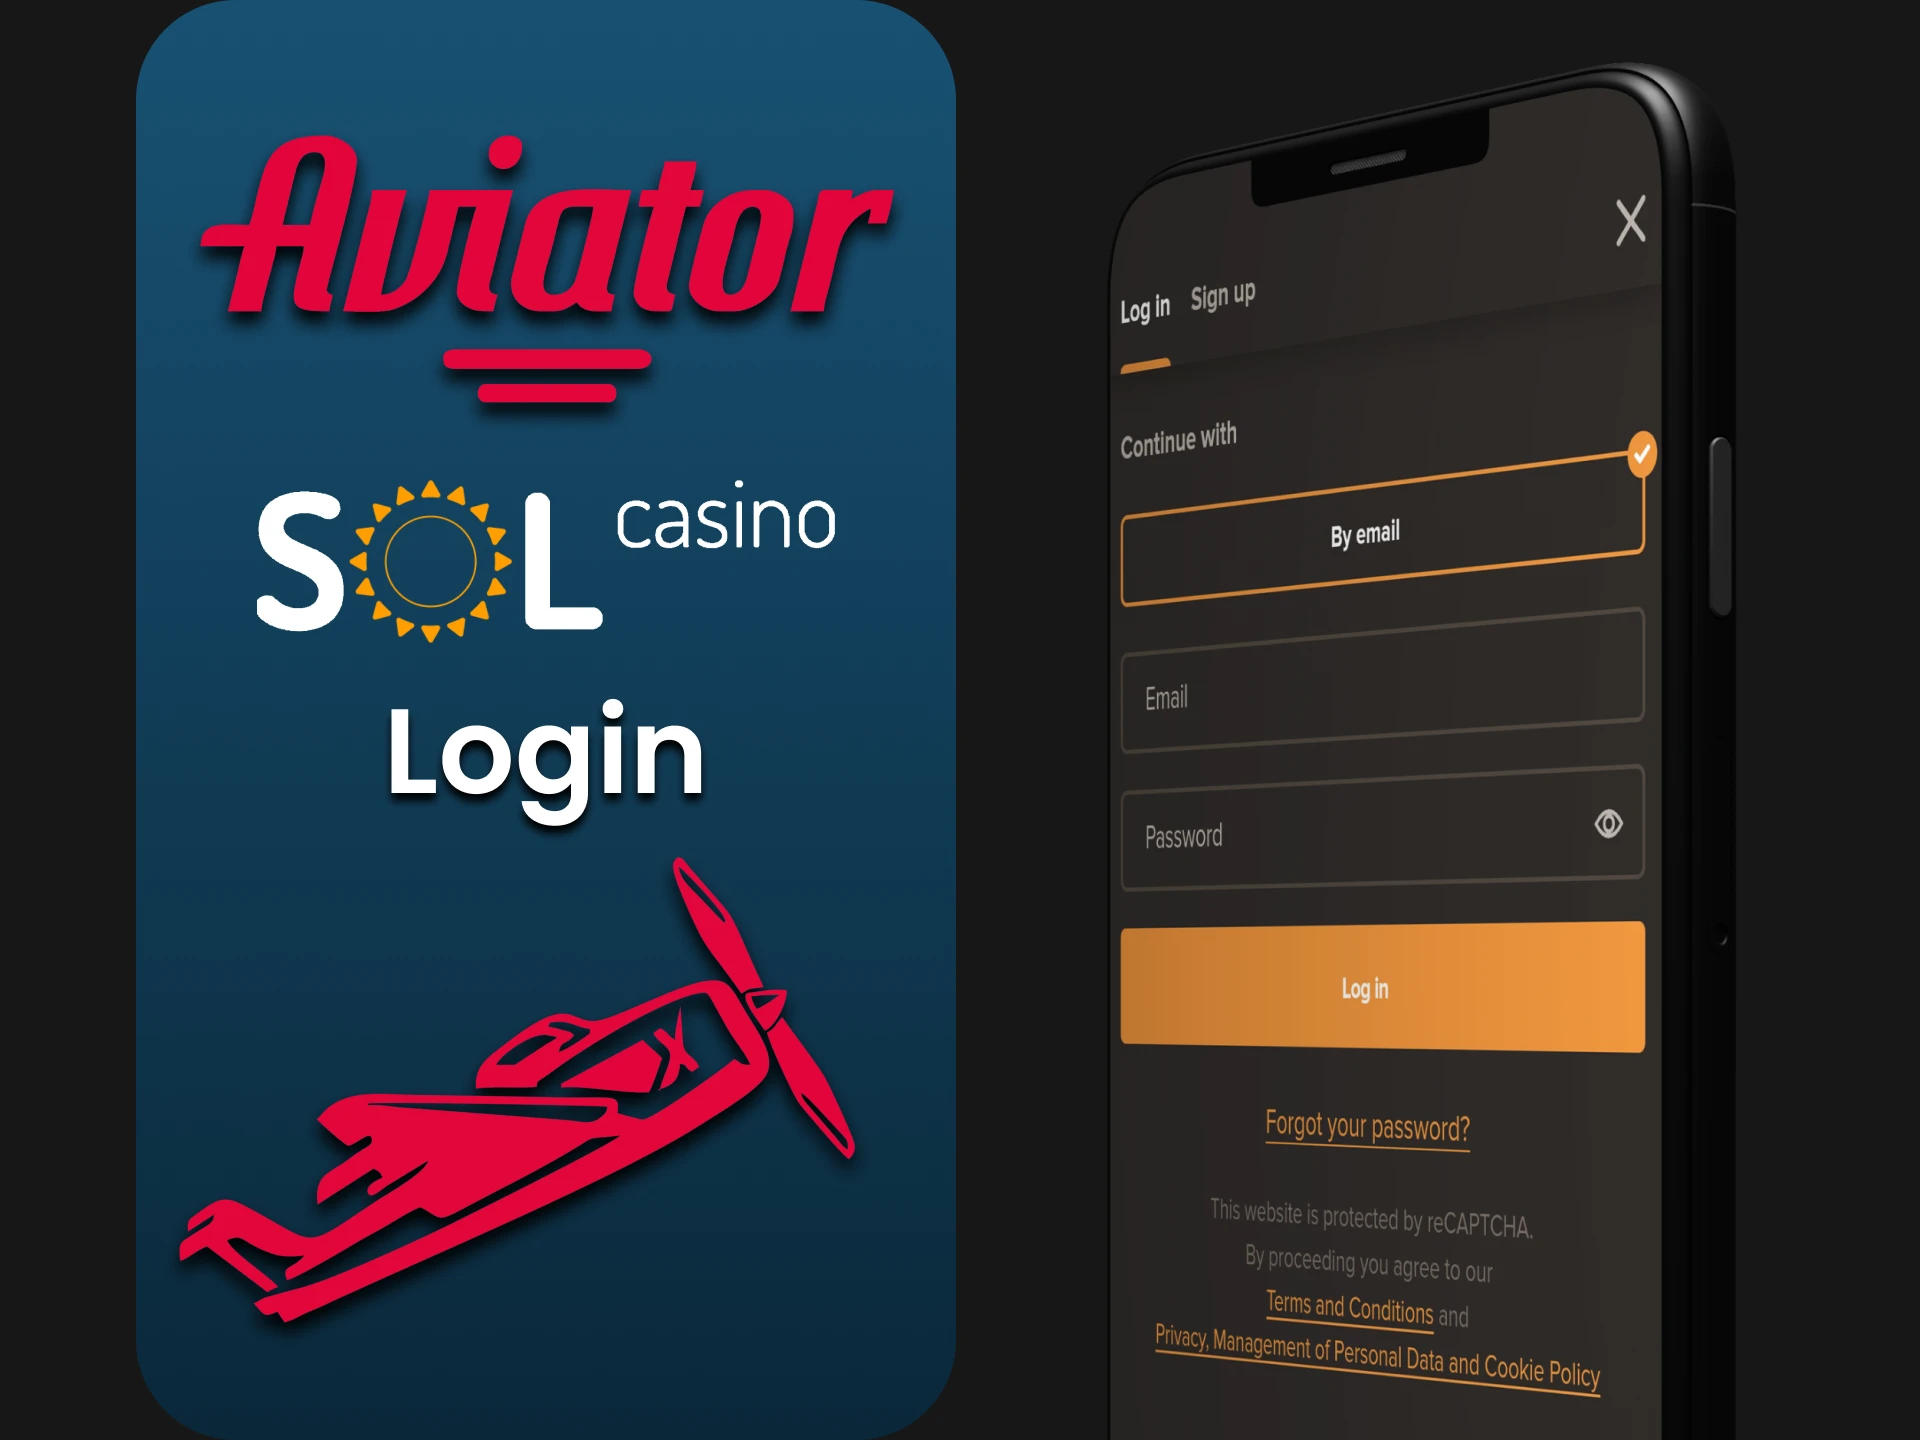 Log in to your personal Sol Casino app account to play Aviator.